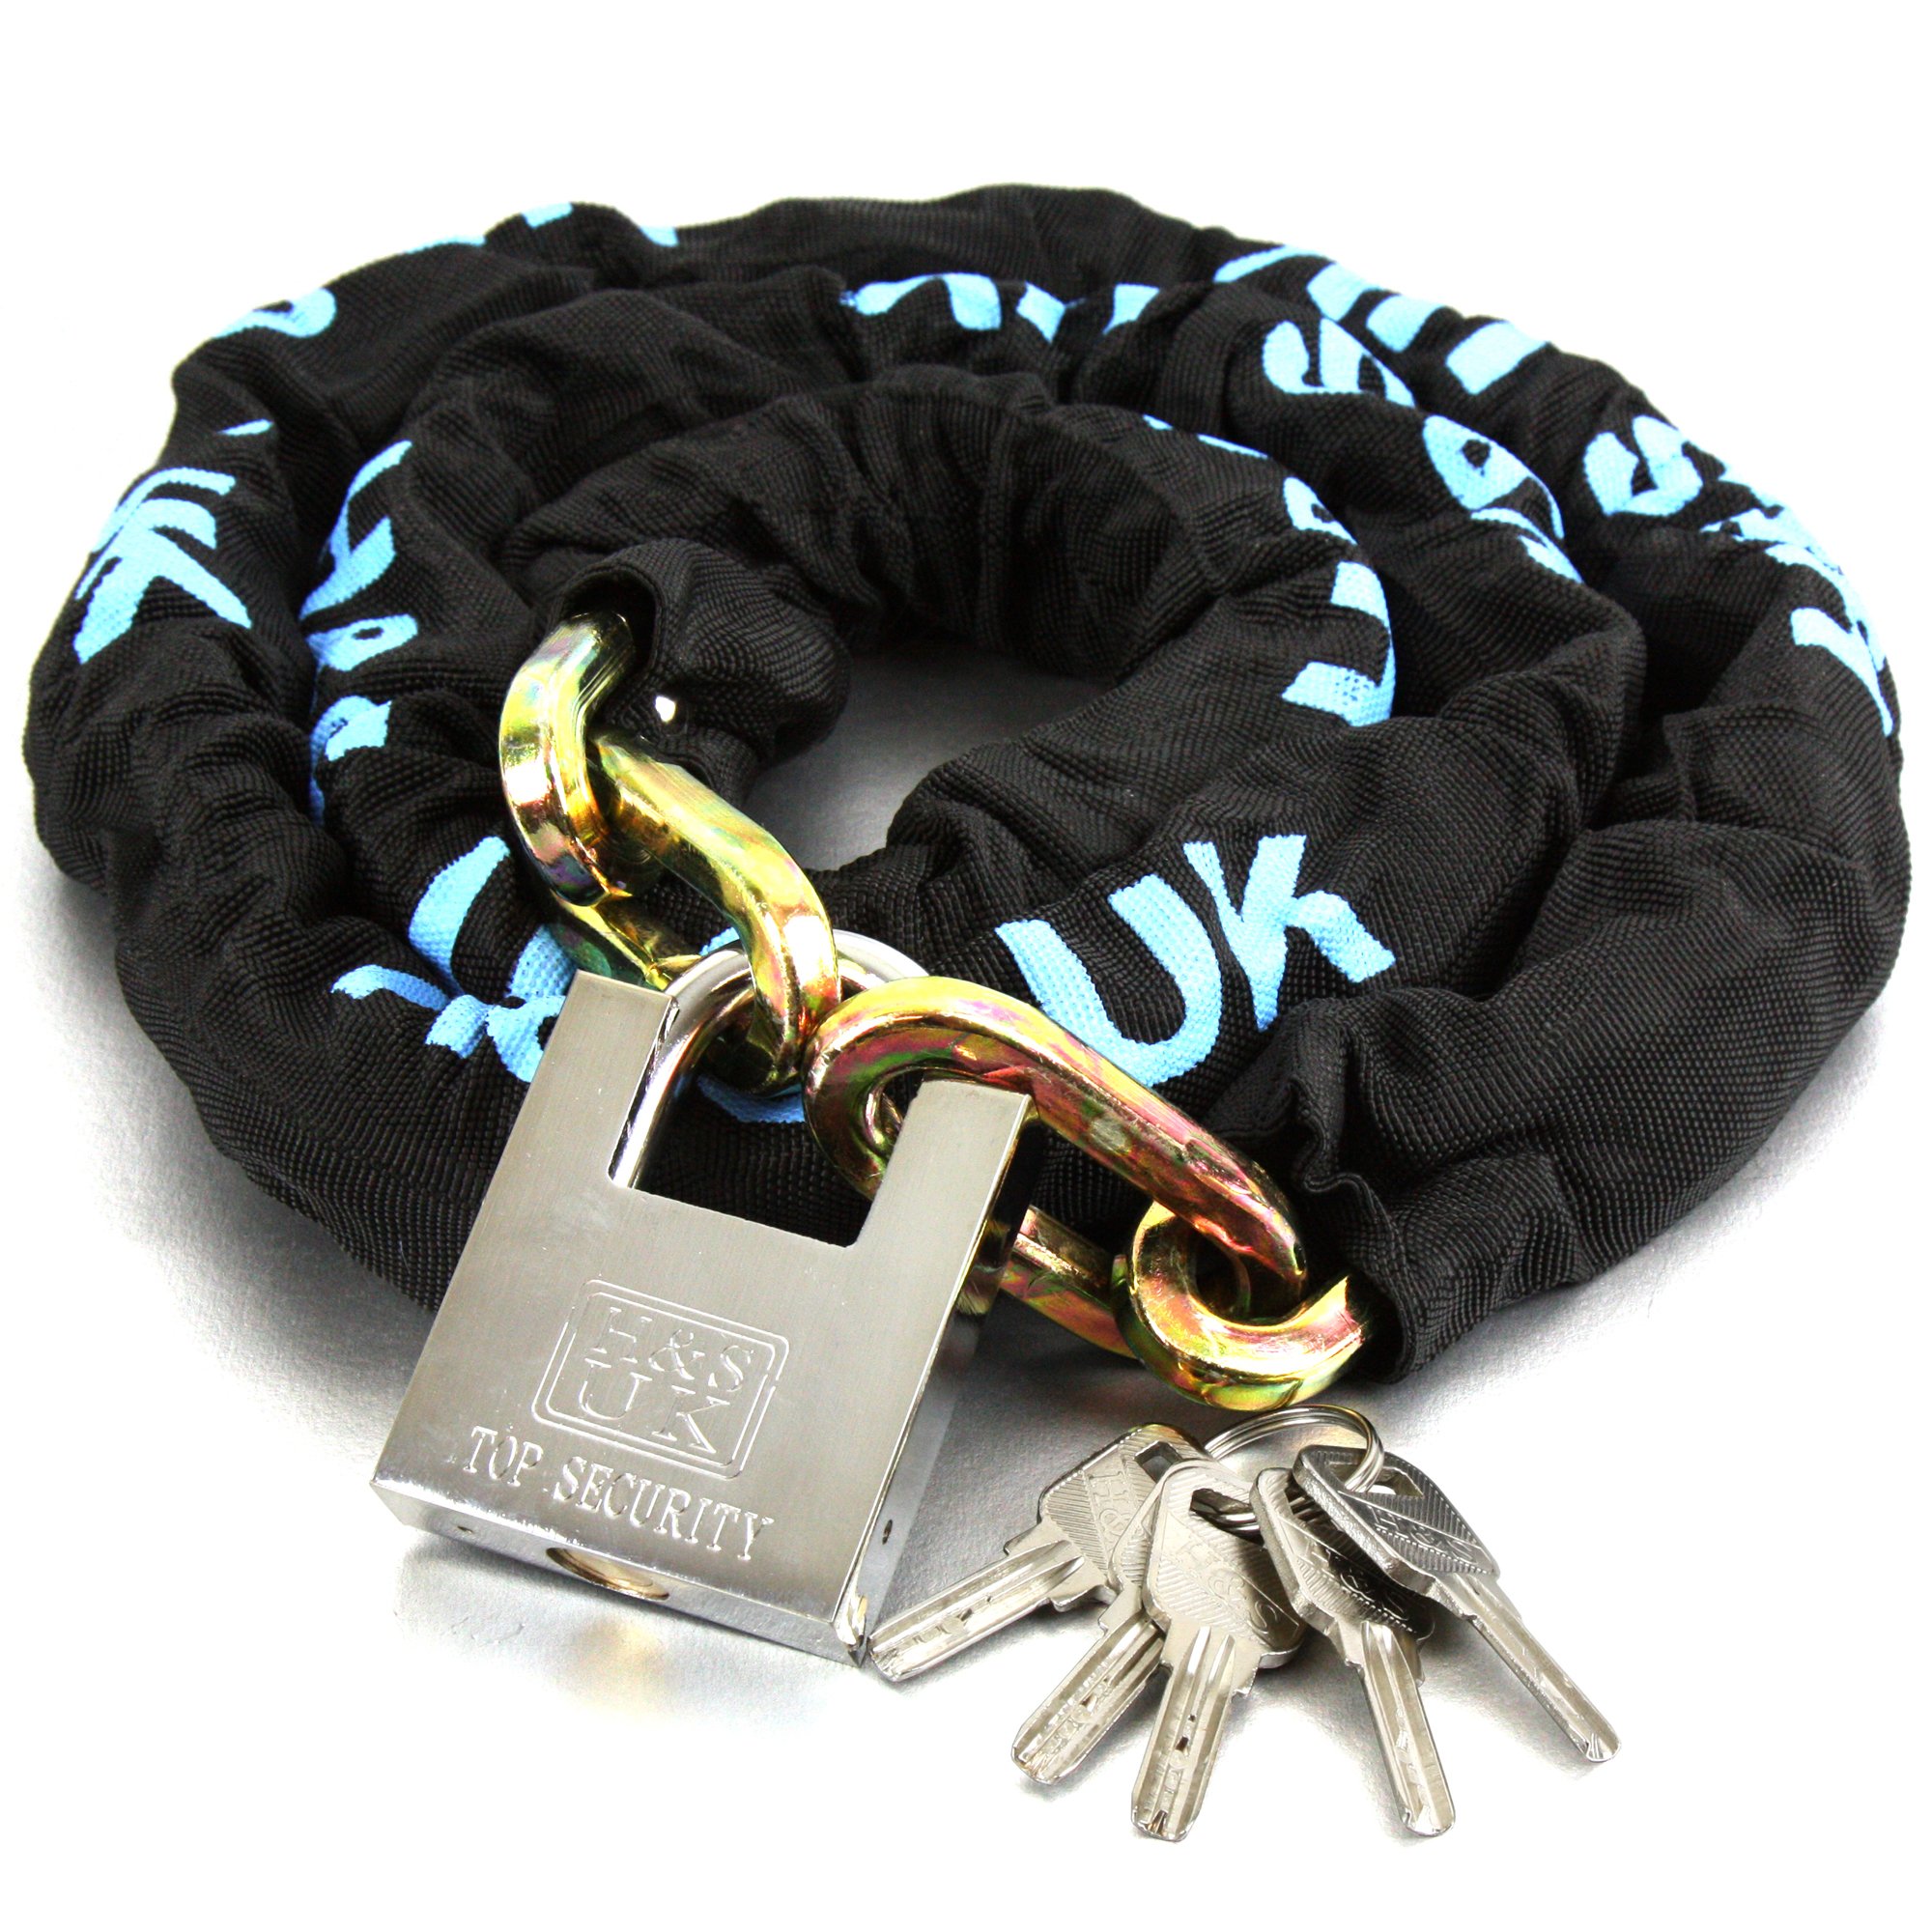 Secure padlock with a chain